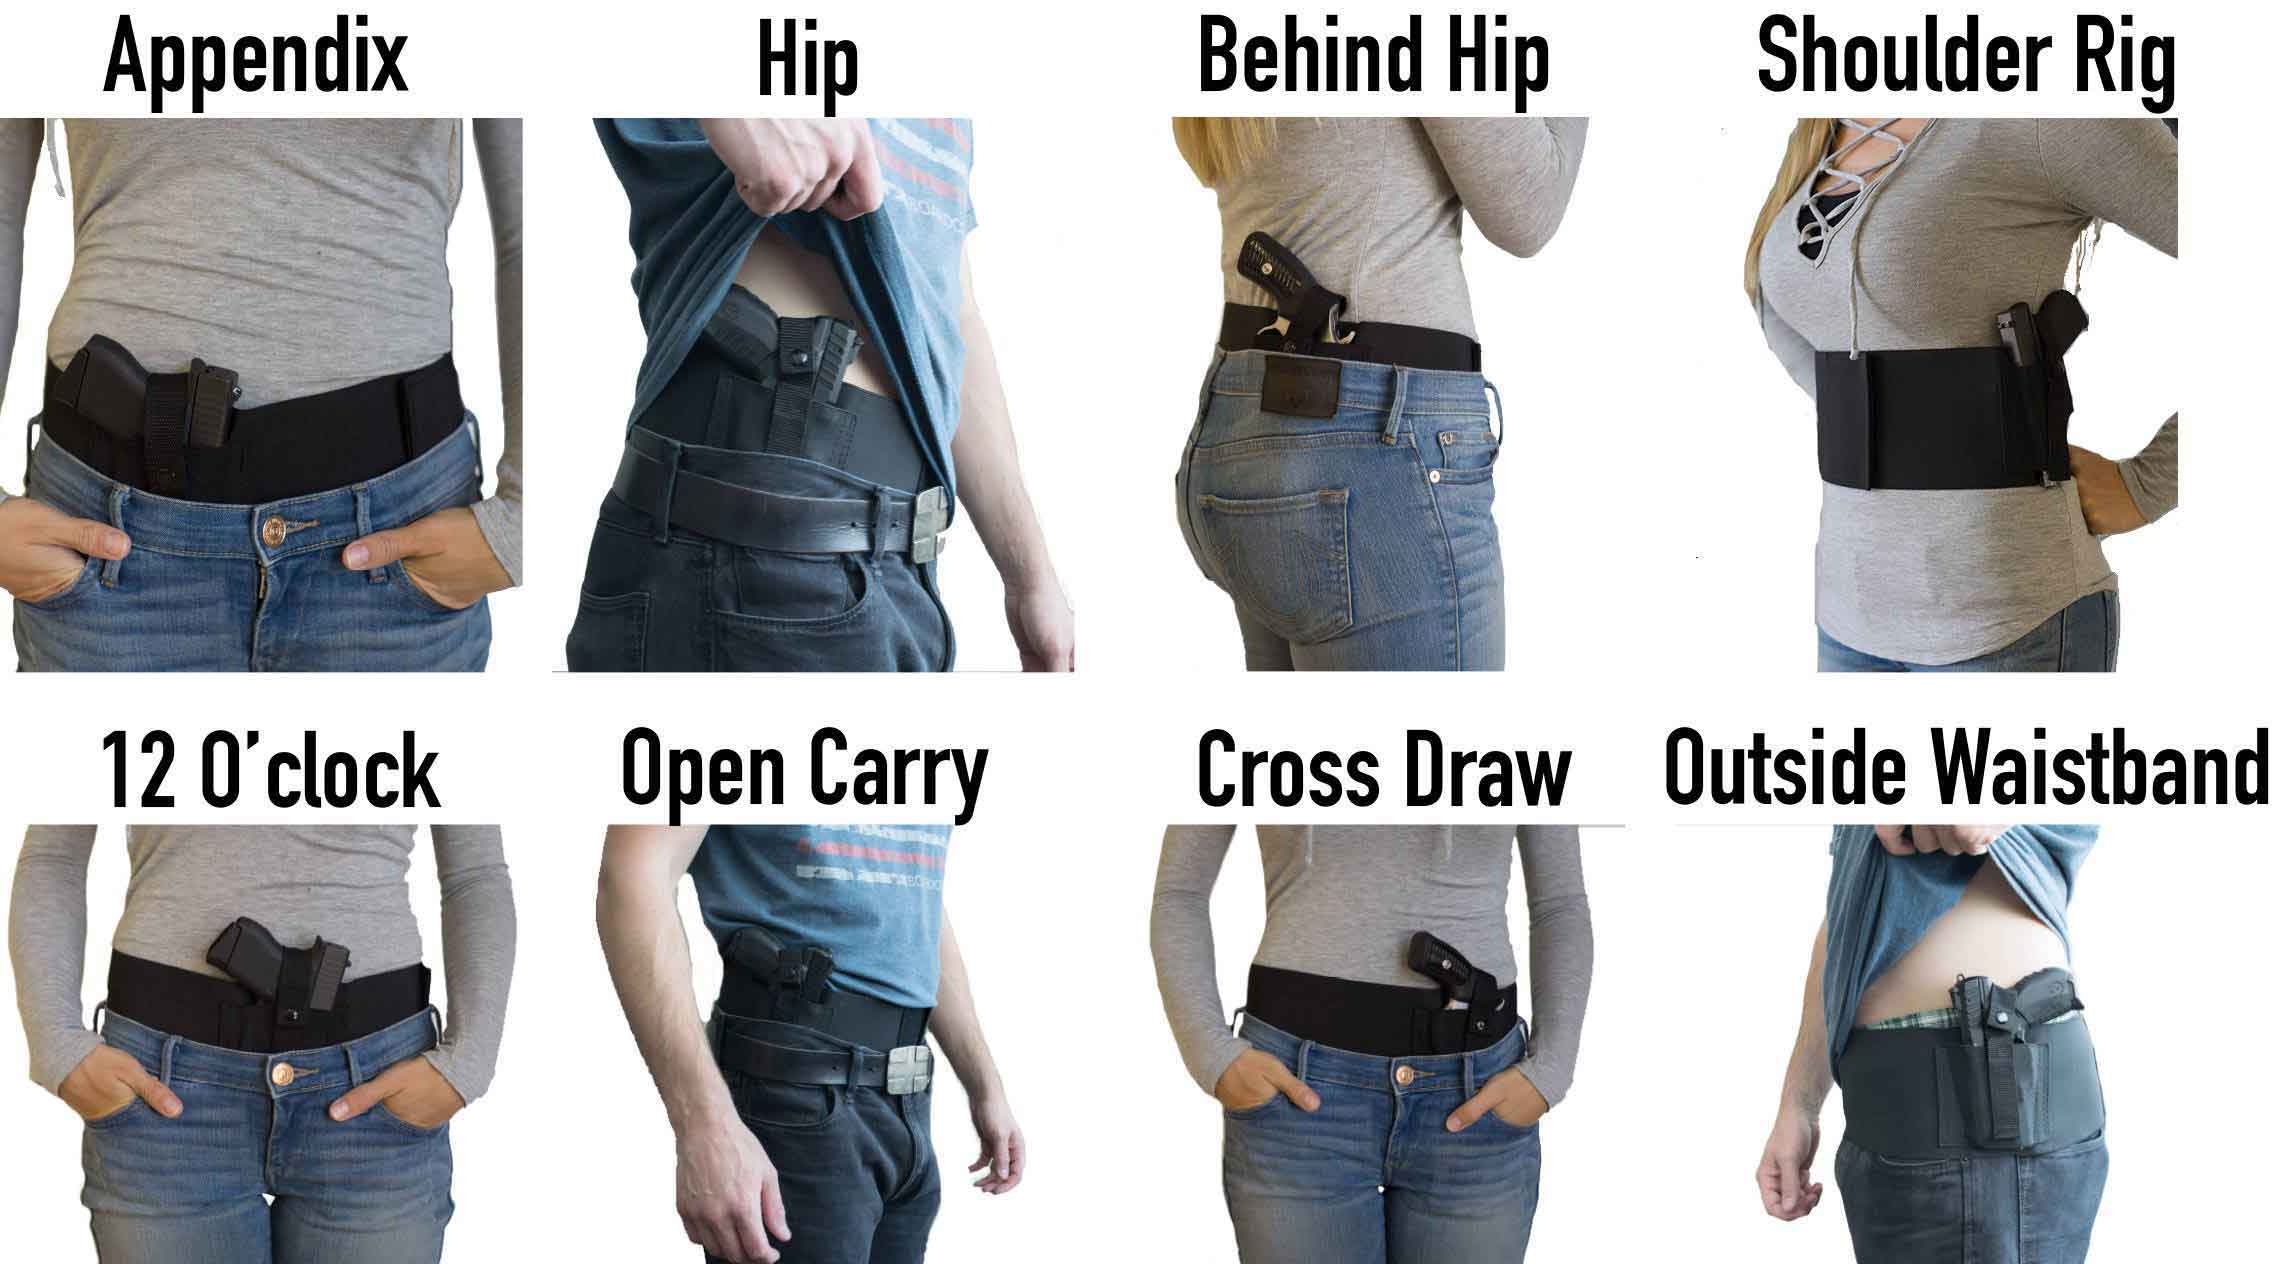 Dinosaurized store| Dragon belly holster | Best belly band holster for women & fat guys